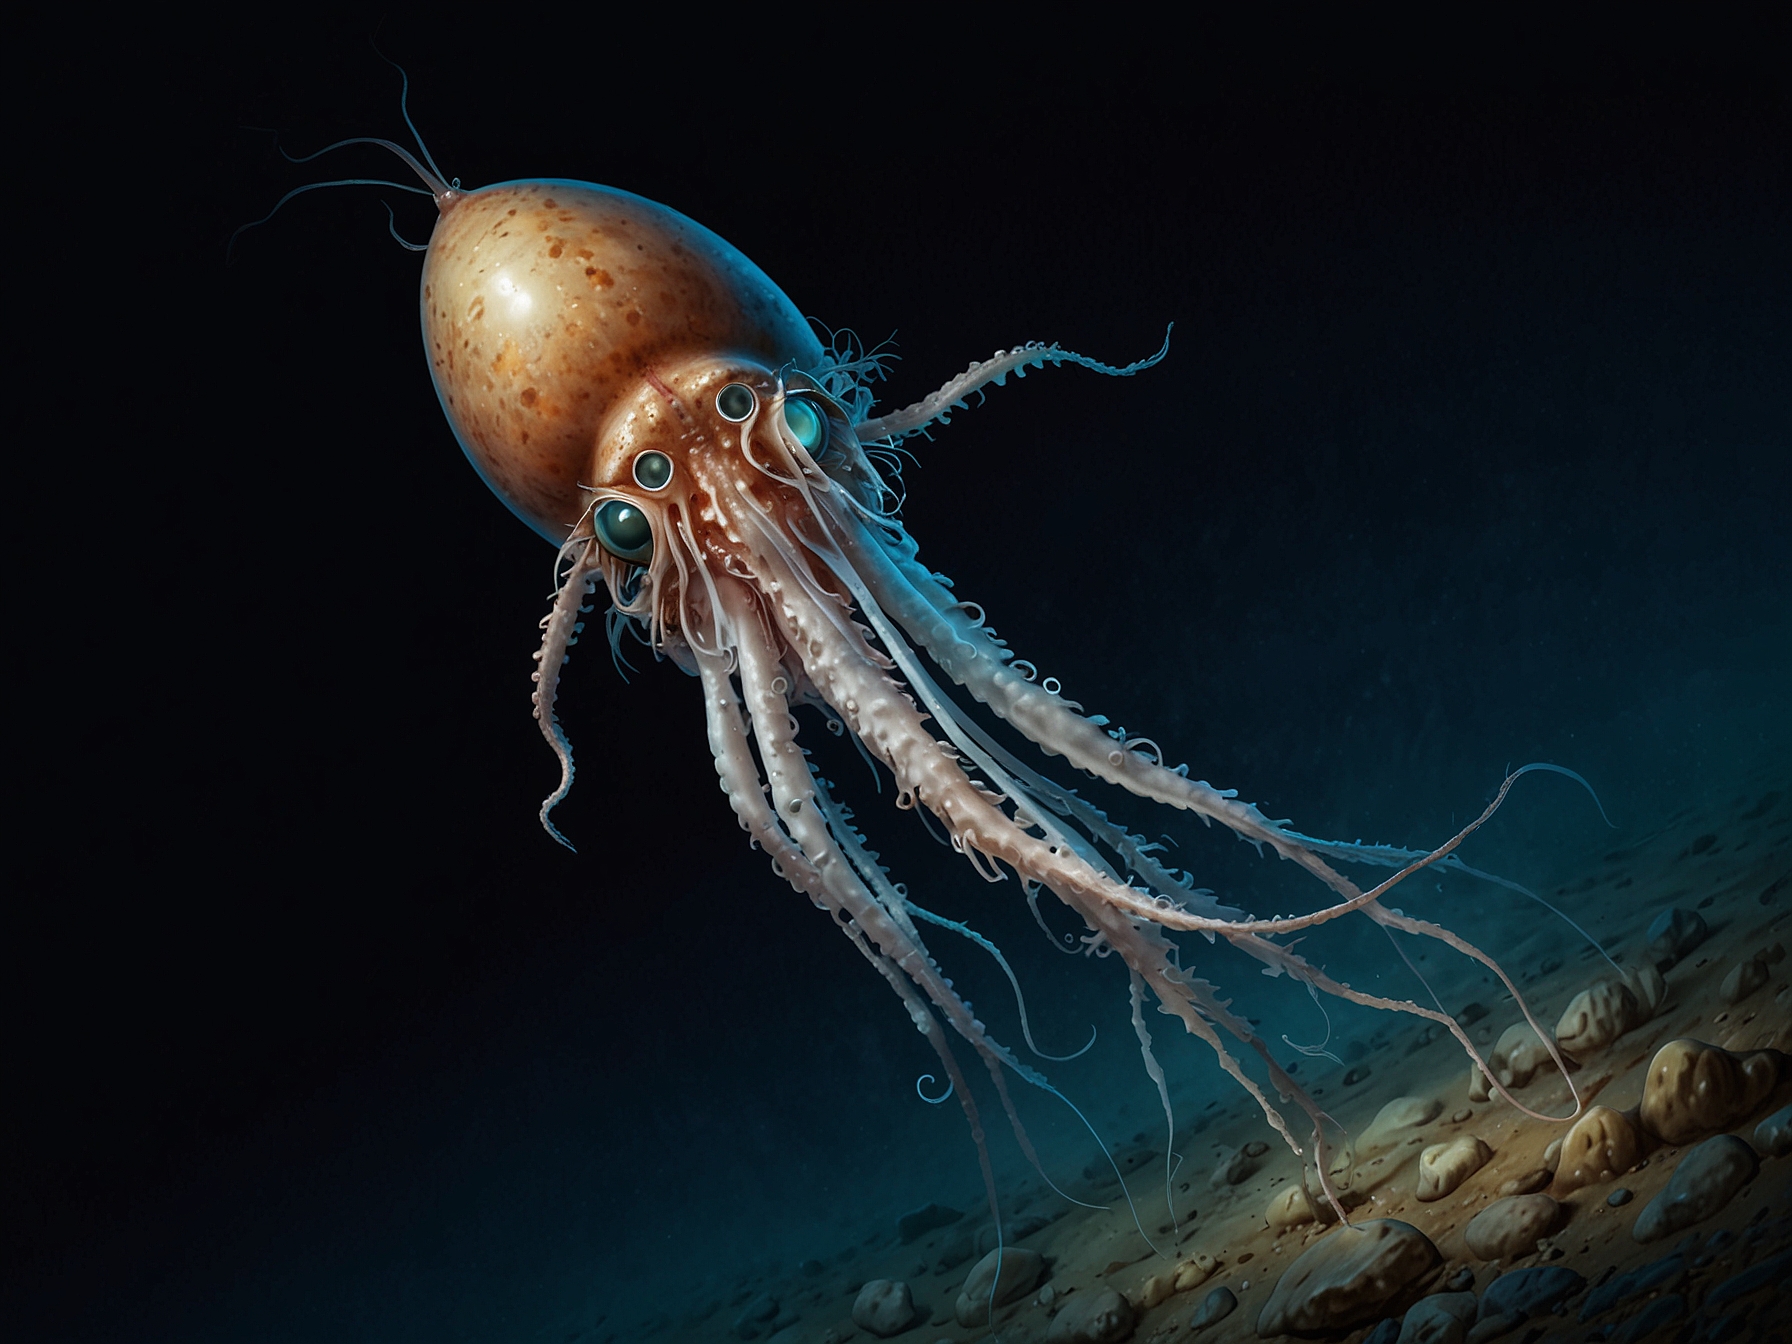 The deep-sea squid is shown clutching a large egg mass, highlighting its unique reproductive behavior. The image emphasizes the importance of technological advancements in studying marine life in extreme ocean depths.